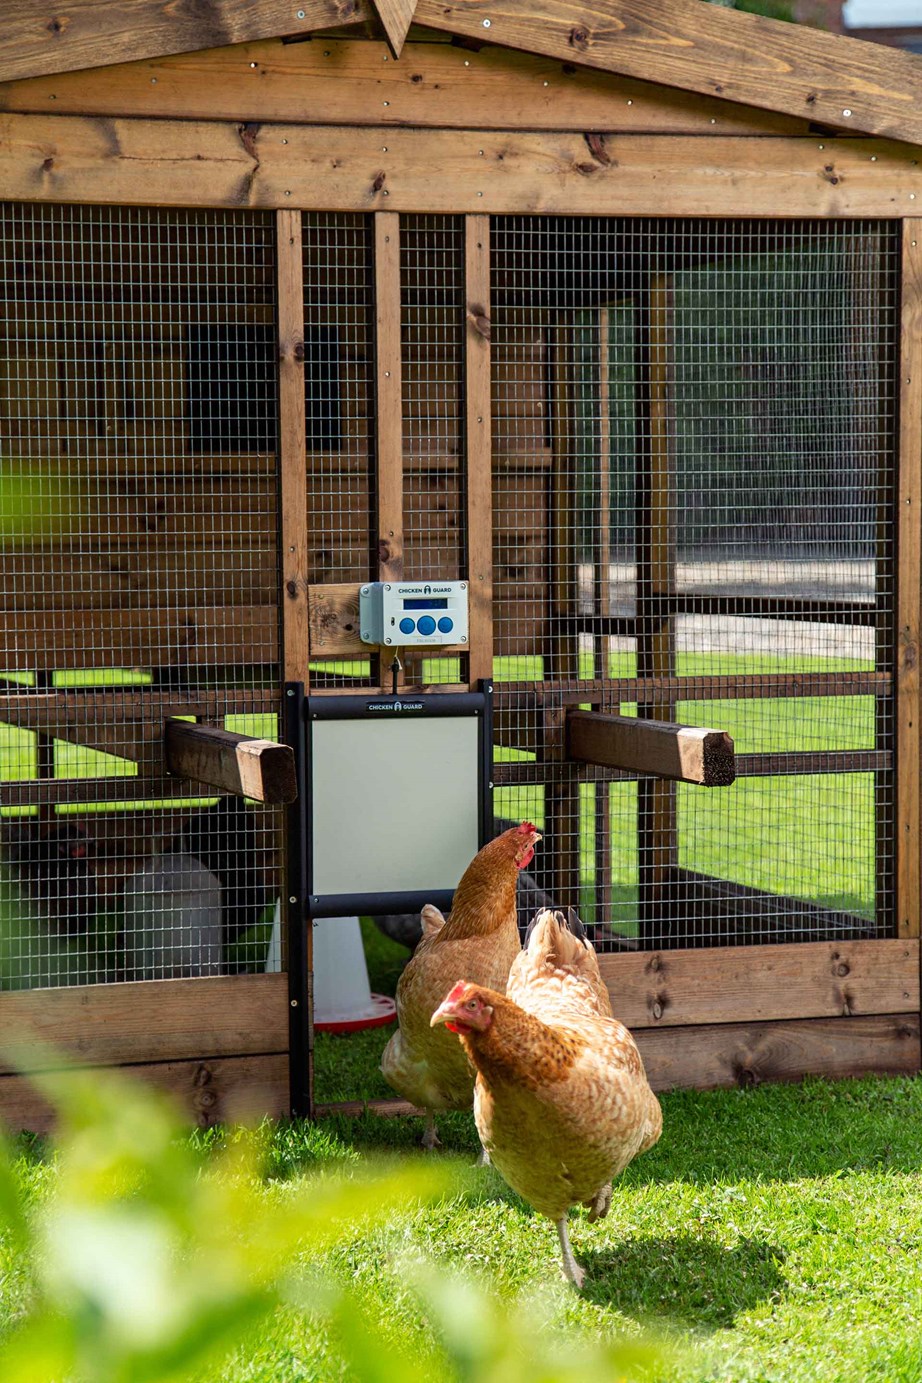 A chicken coop with a ChickenGuard automatic door-opener.